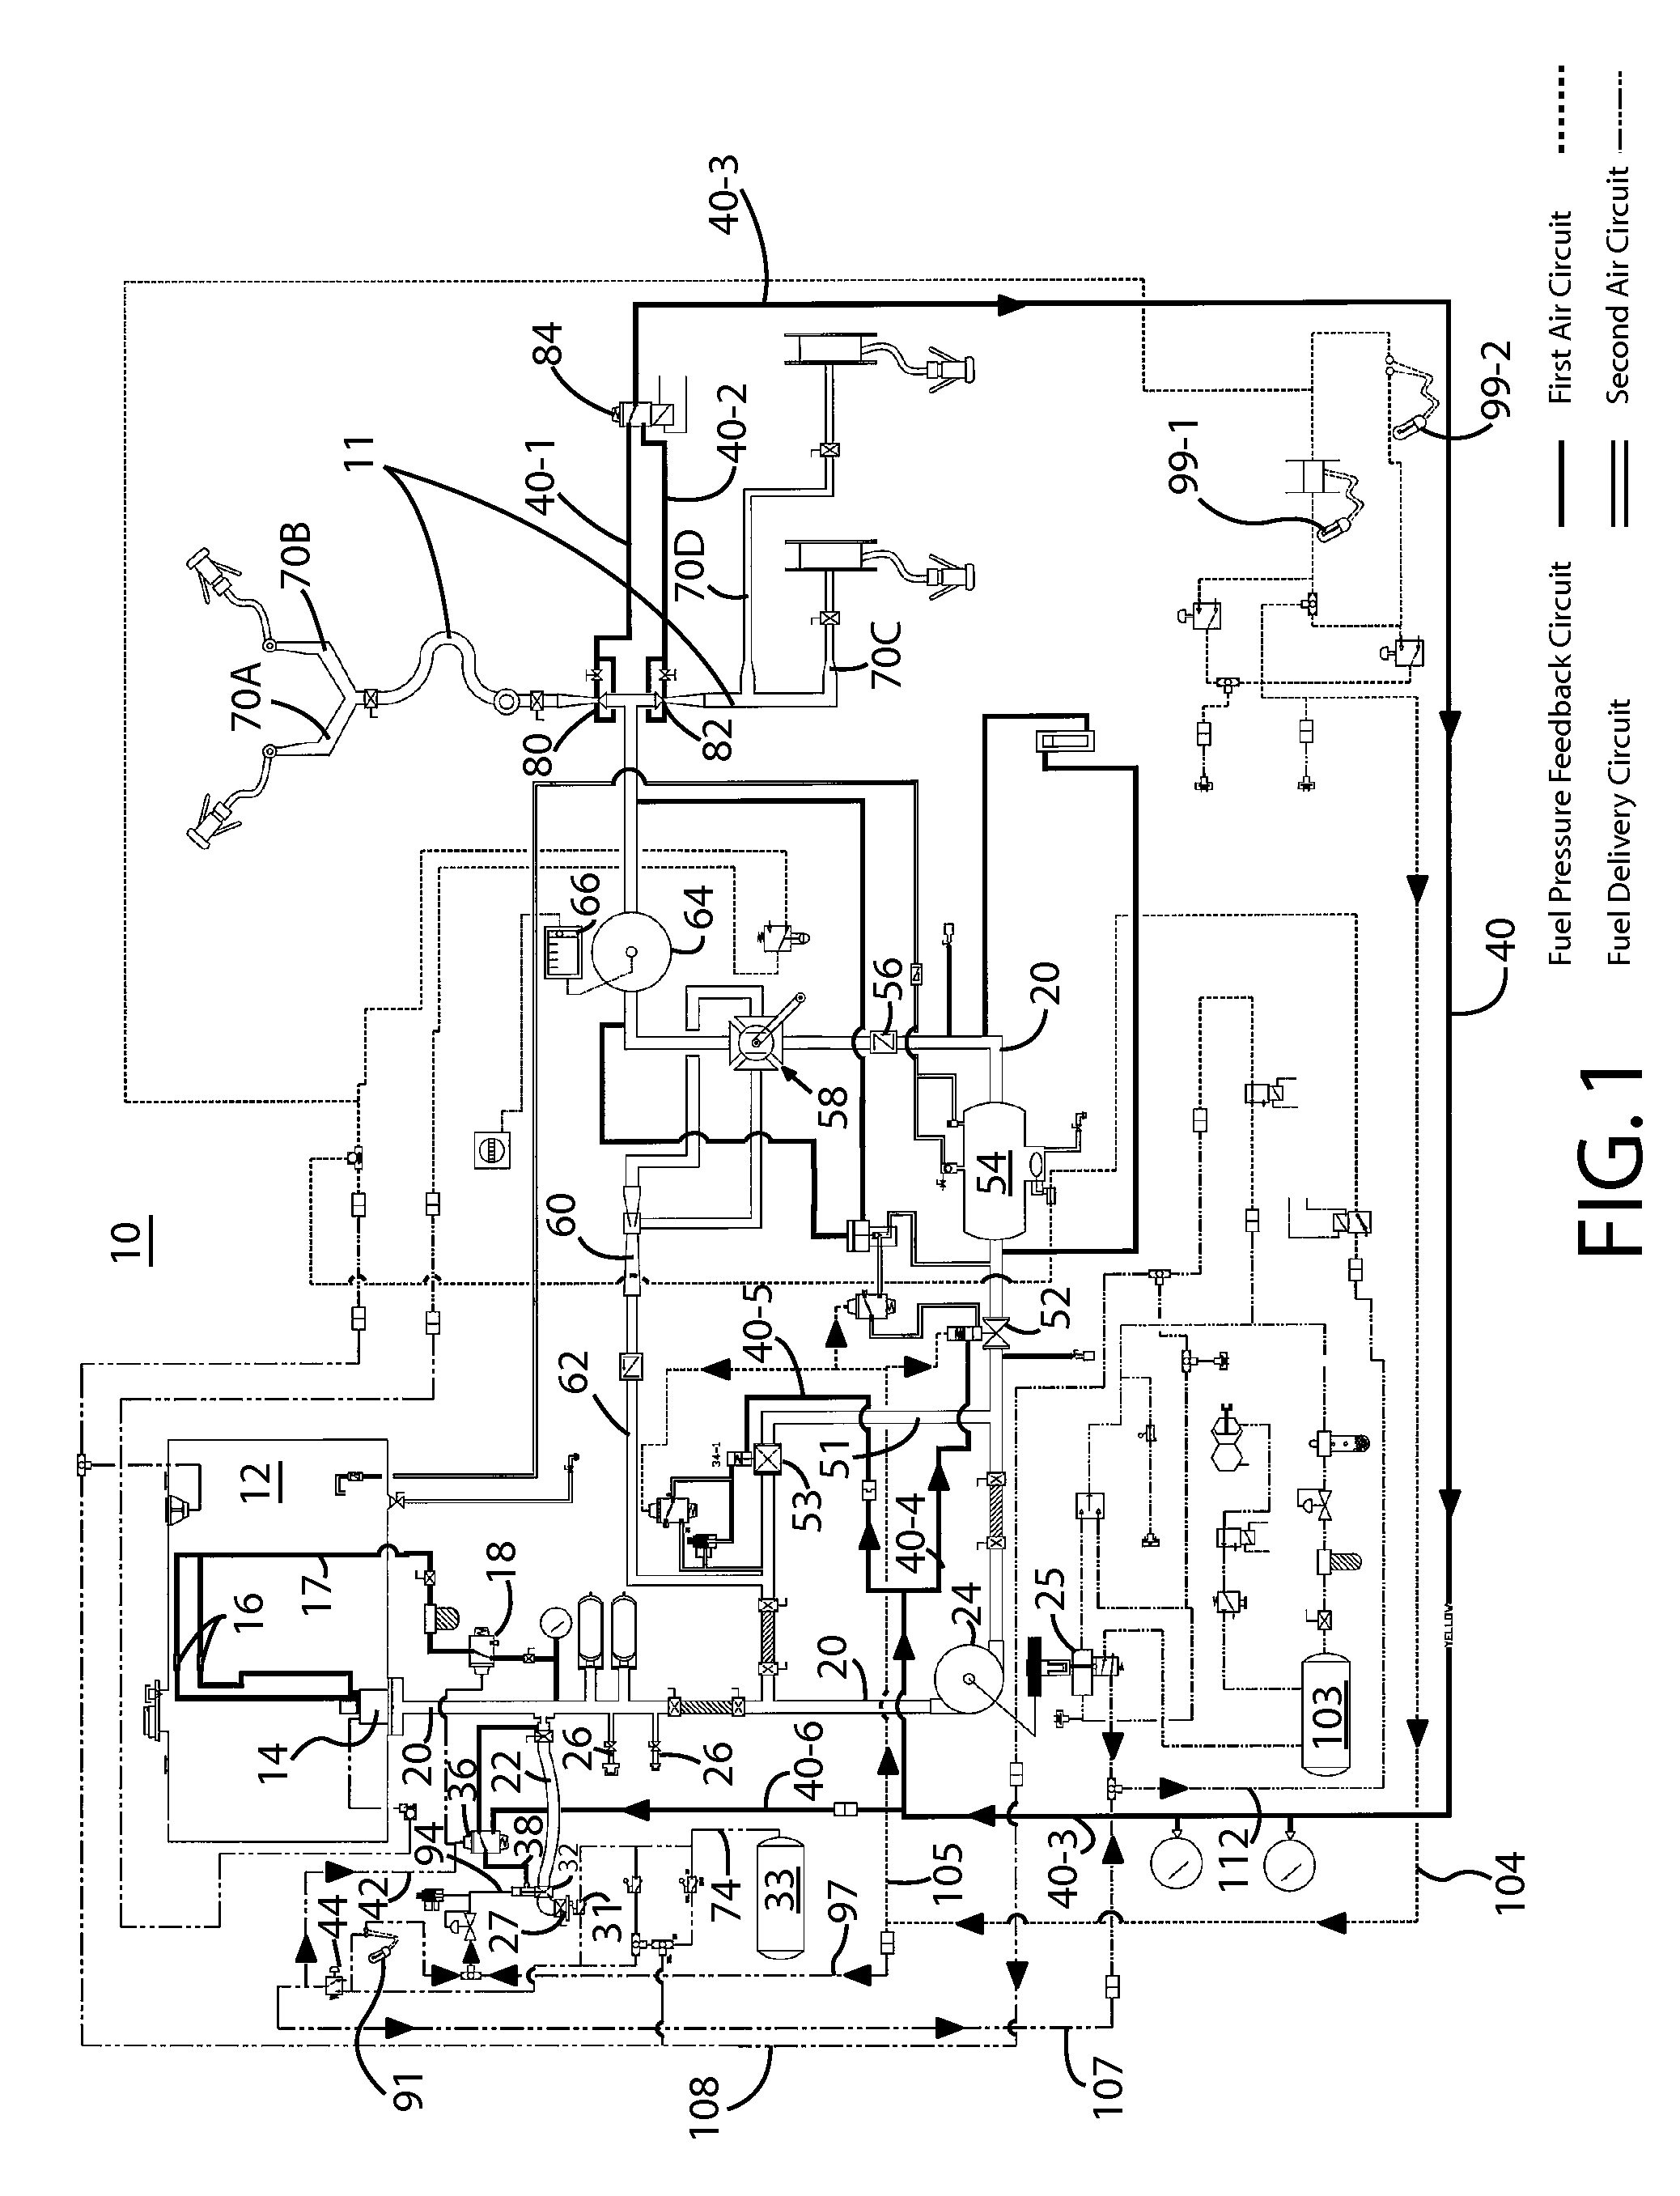 System and method for distributing fuel from a hydrant pit valve at an airport